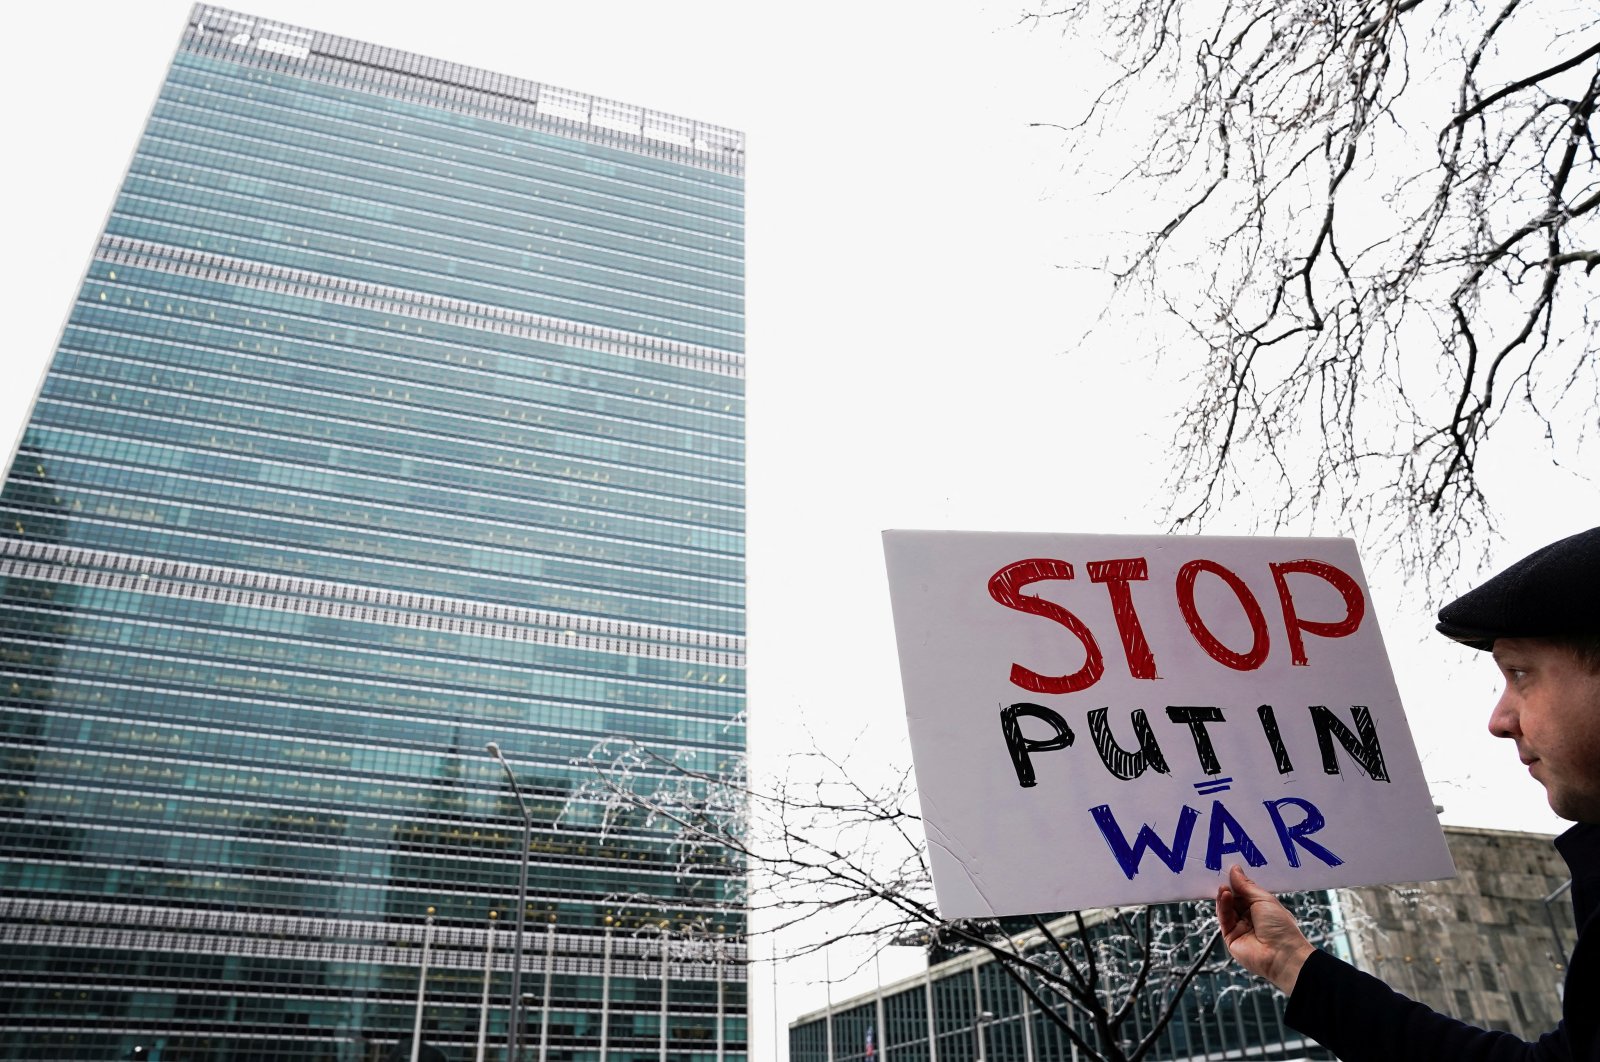 A lone protester stands with a sign condemning Vladimir Putin across the street from U.N. headquarters in Manhattan New York City, New York, U.S., Feb. 25, 2022.  (Reuters Photo)